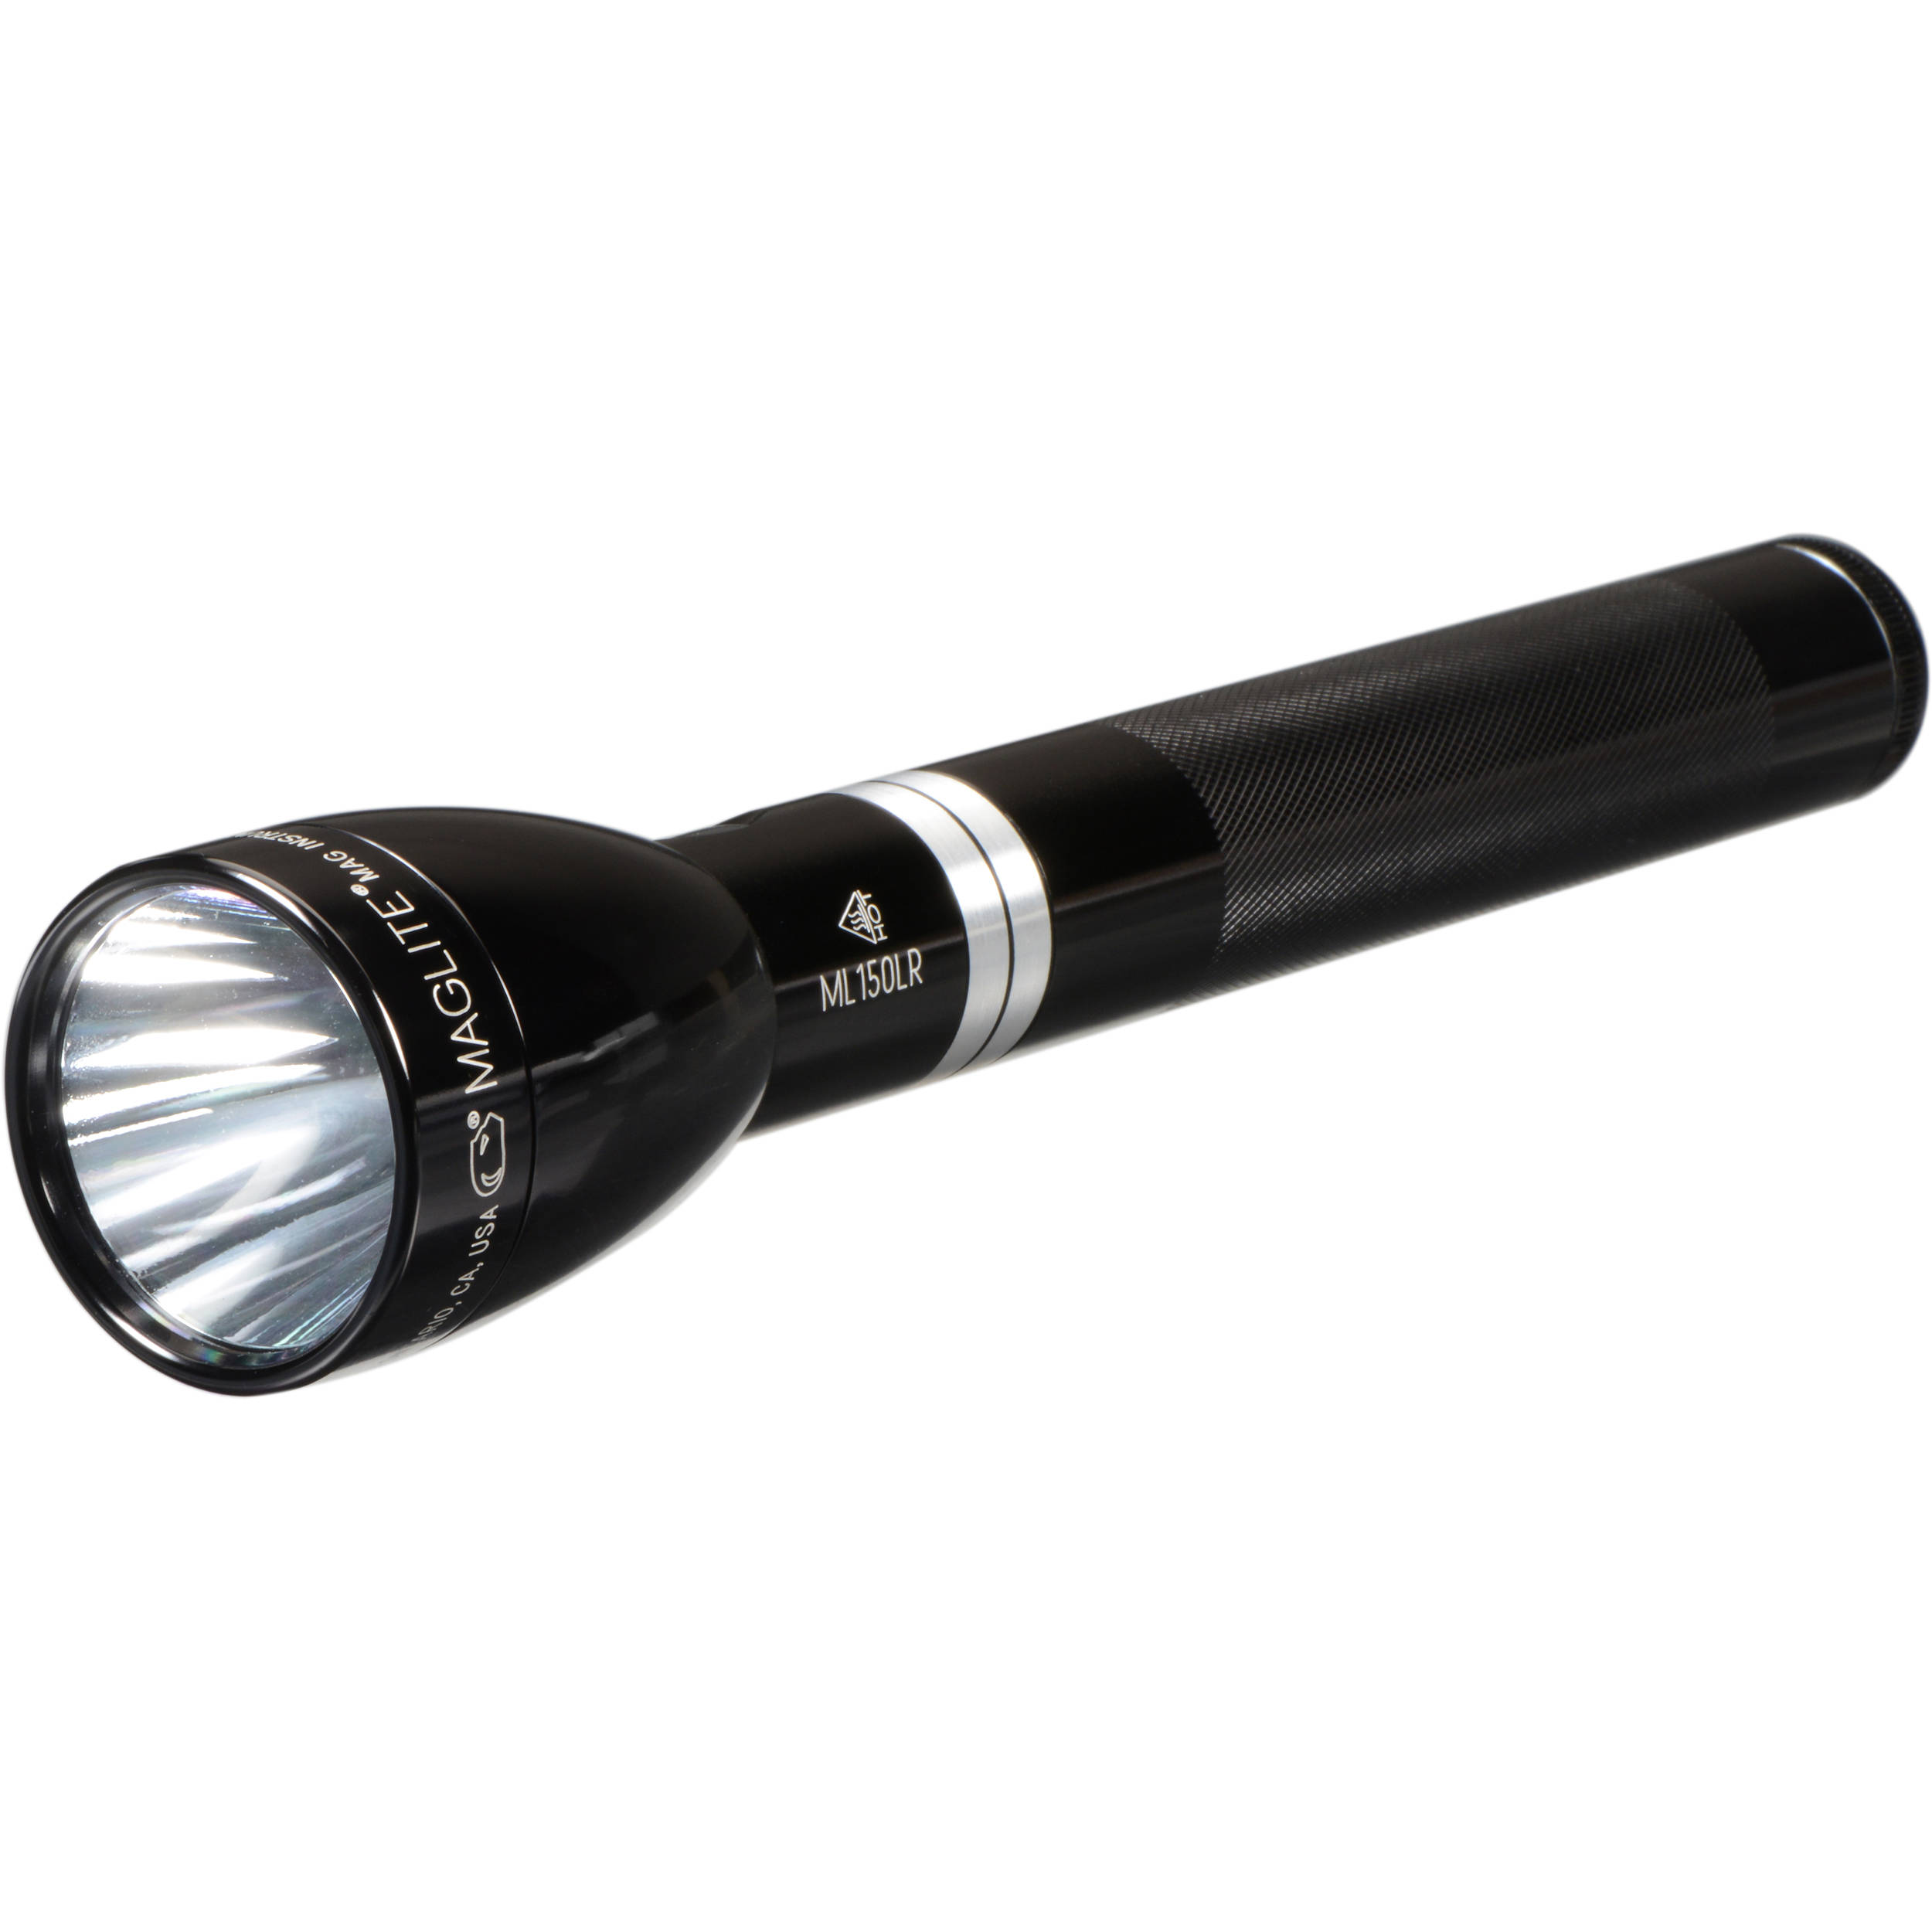 Rechargeable Flashlight System Accessories #ML150LR-1019 Maglite ML150LR